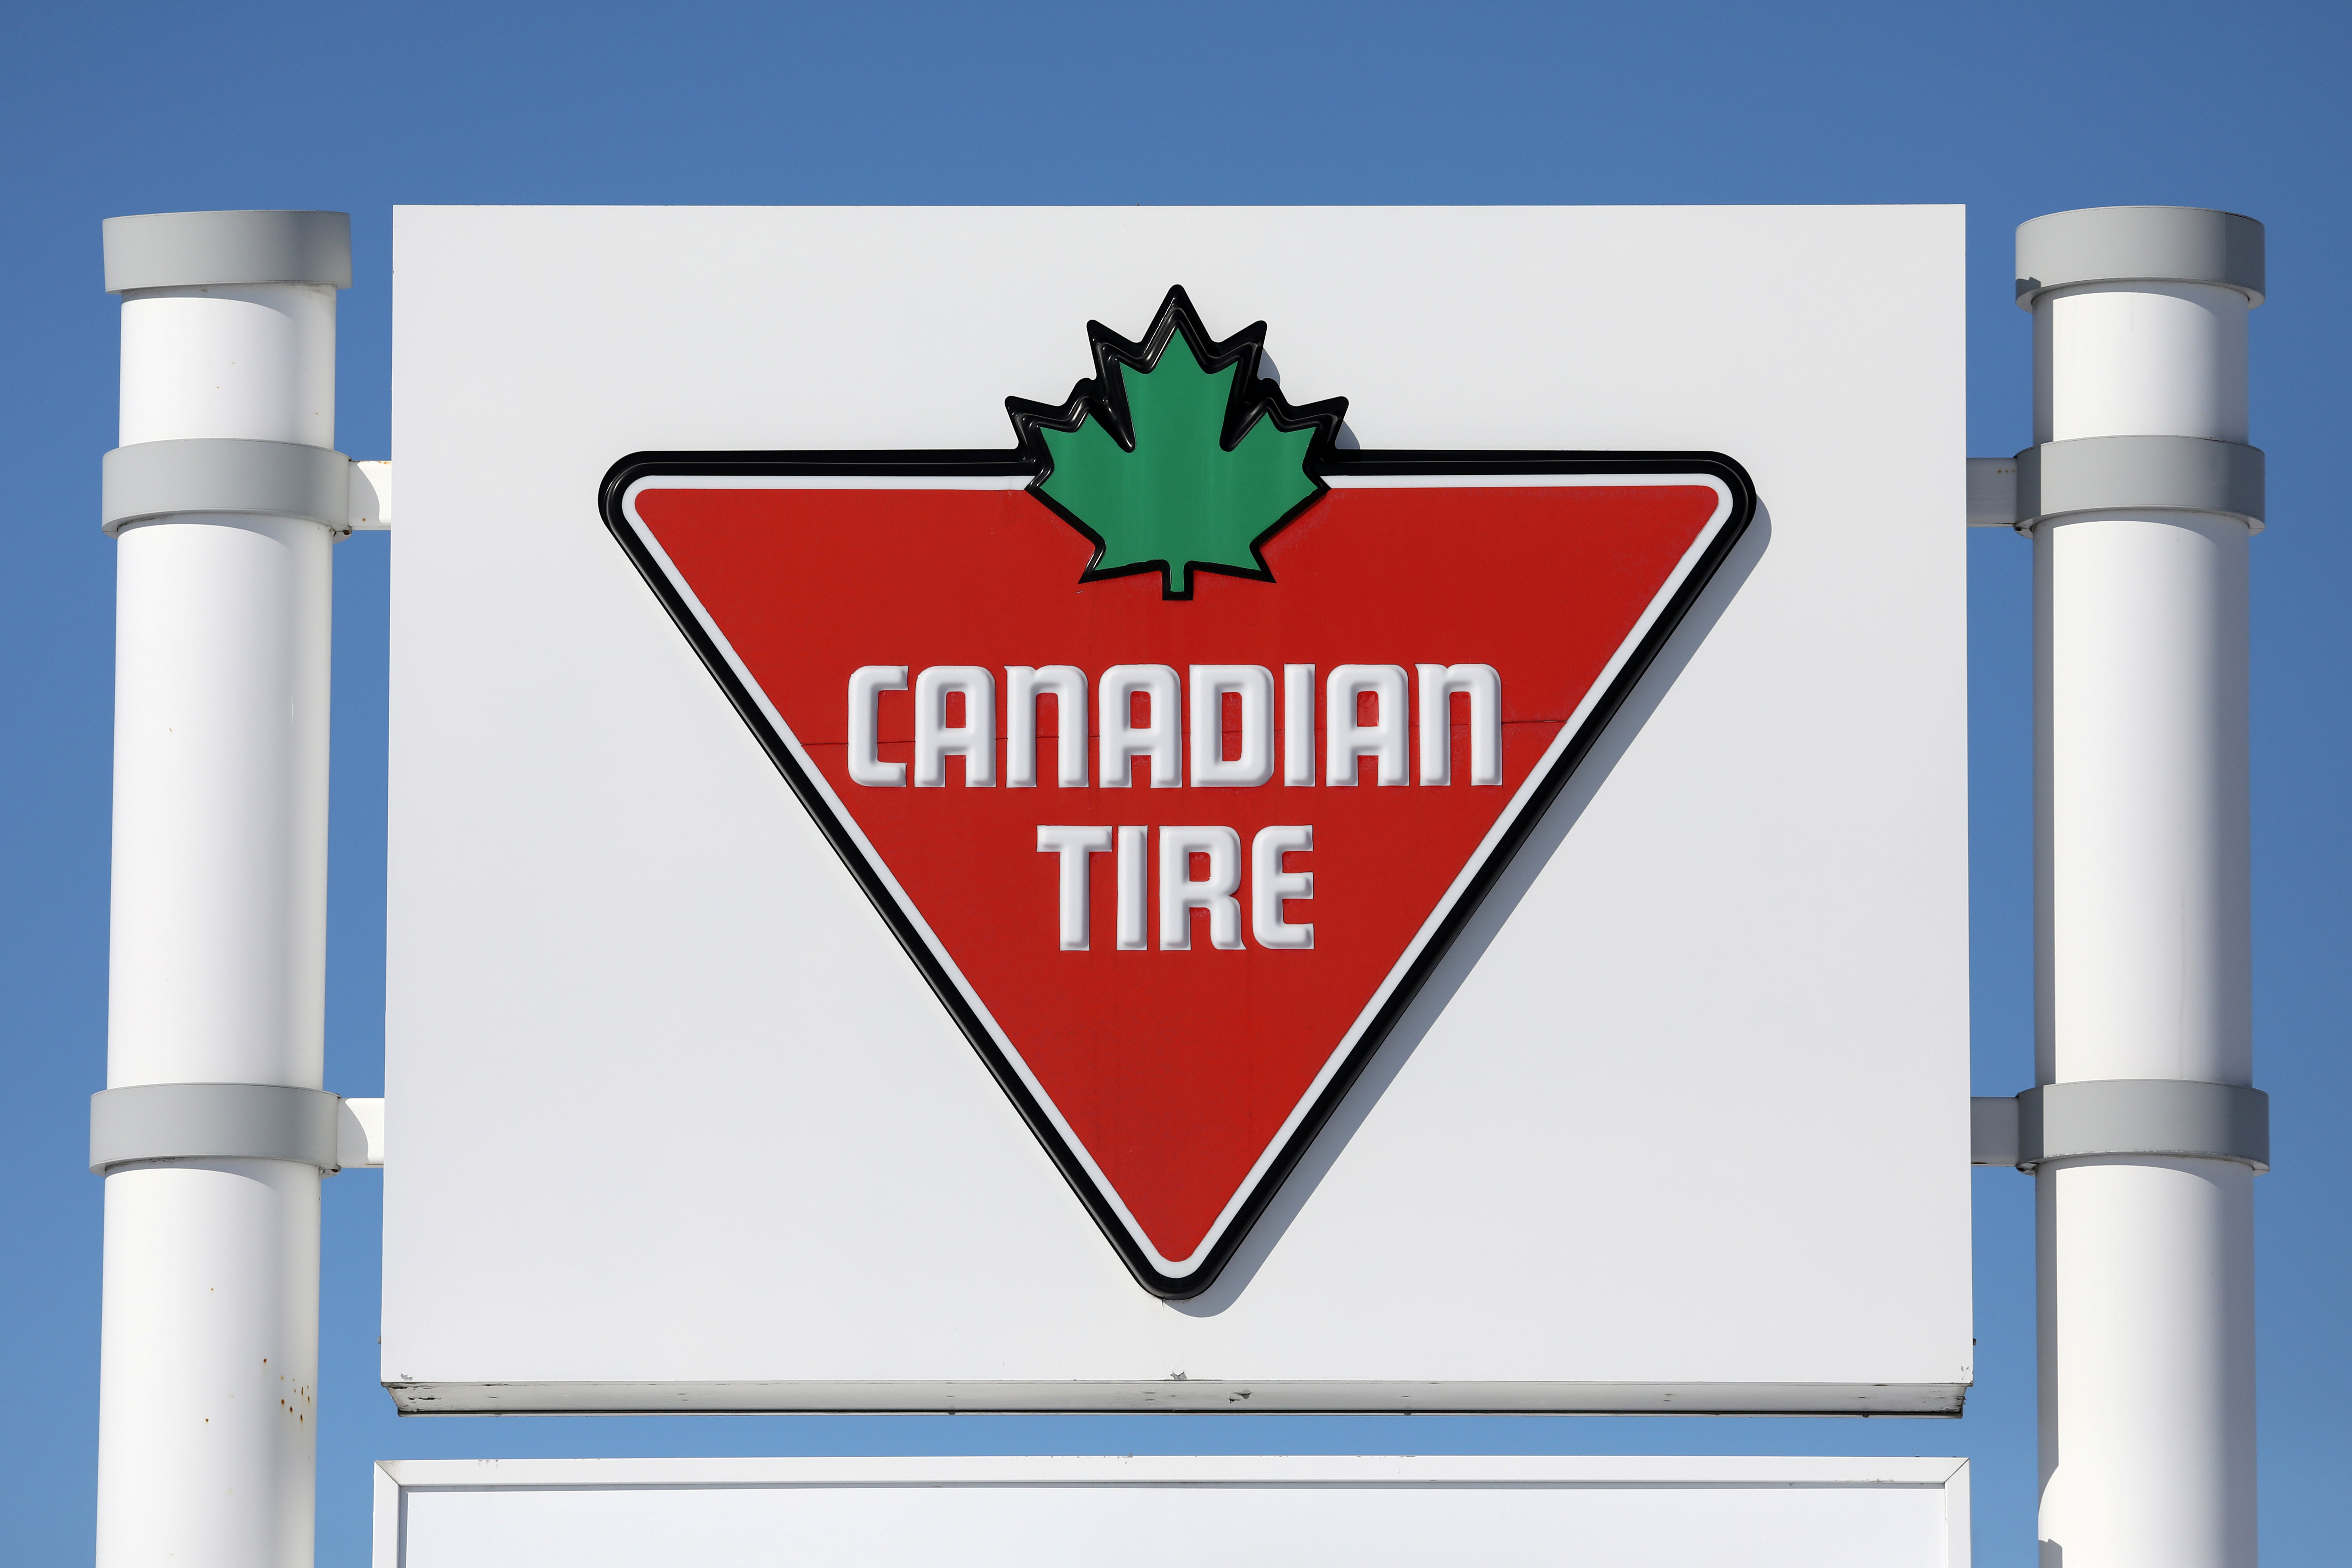 The Canadian Tire logo is seen in Ottawa